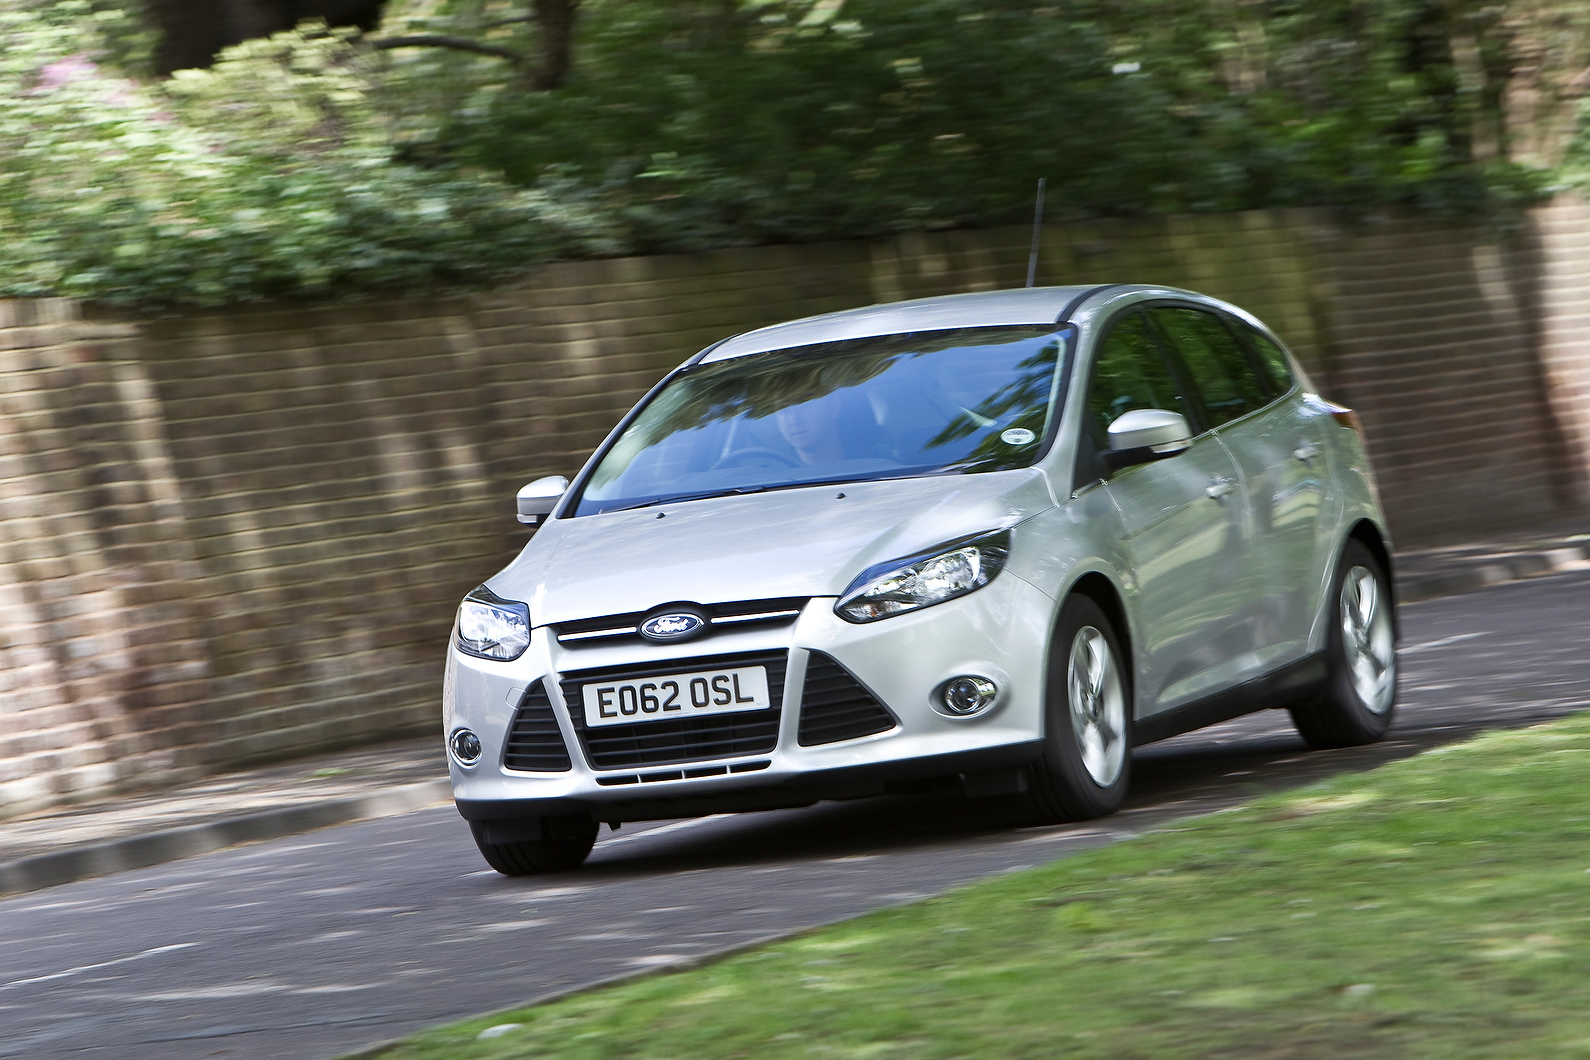 Ford focus 1.6 tdci engine systems failure